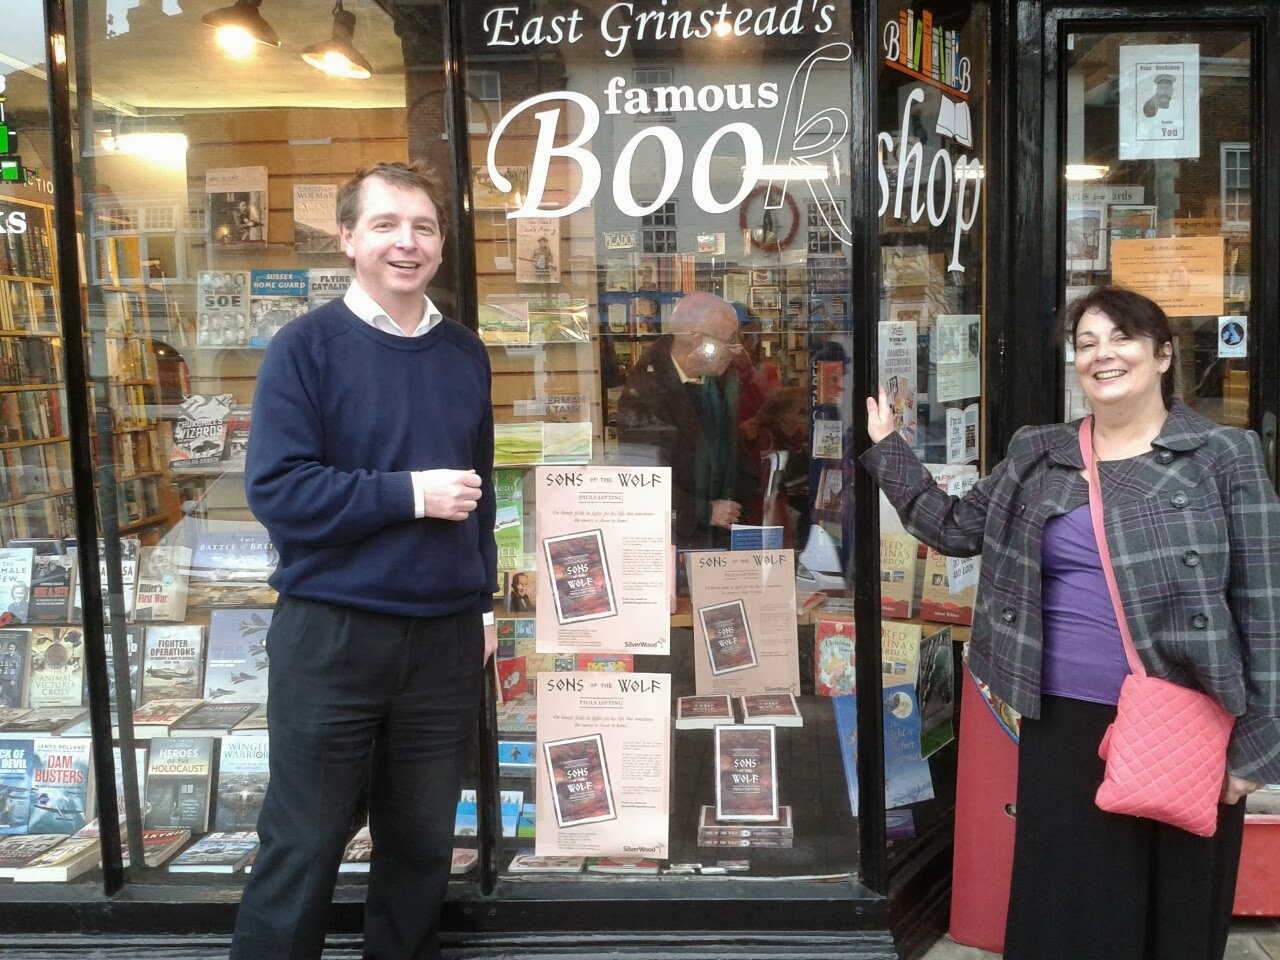 Me the author with John Pye, Independent book shop owner